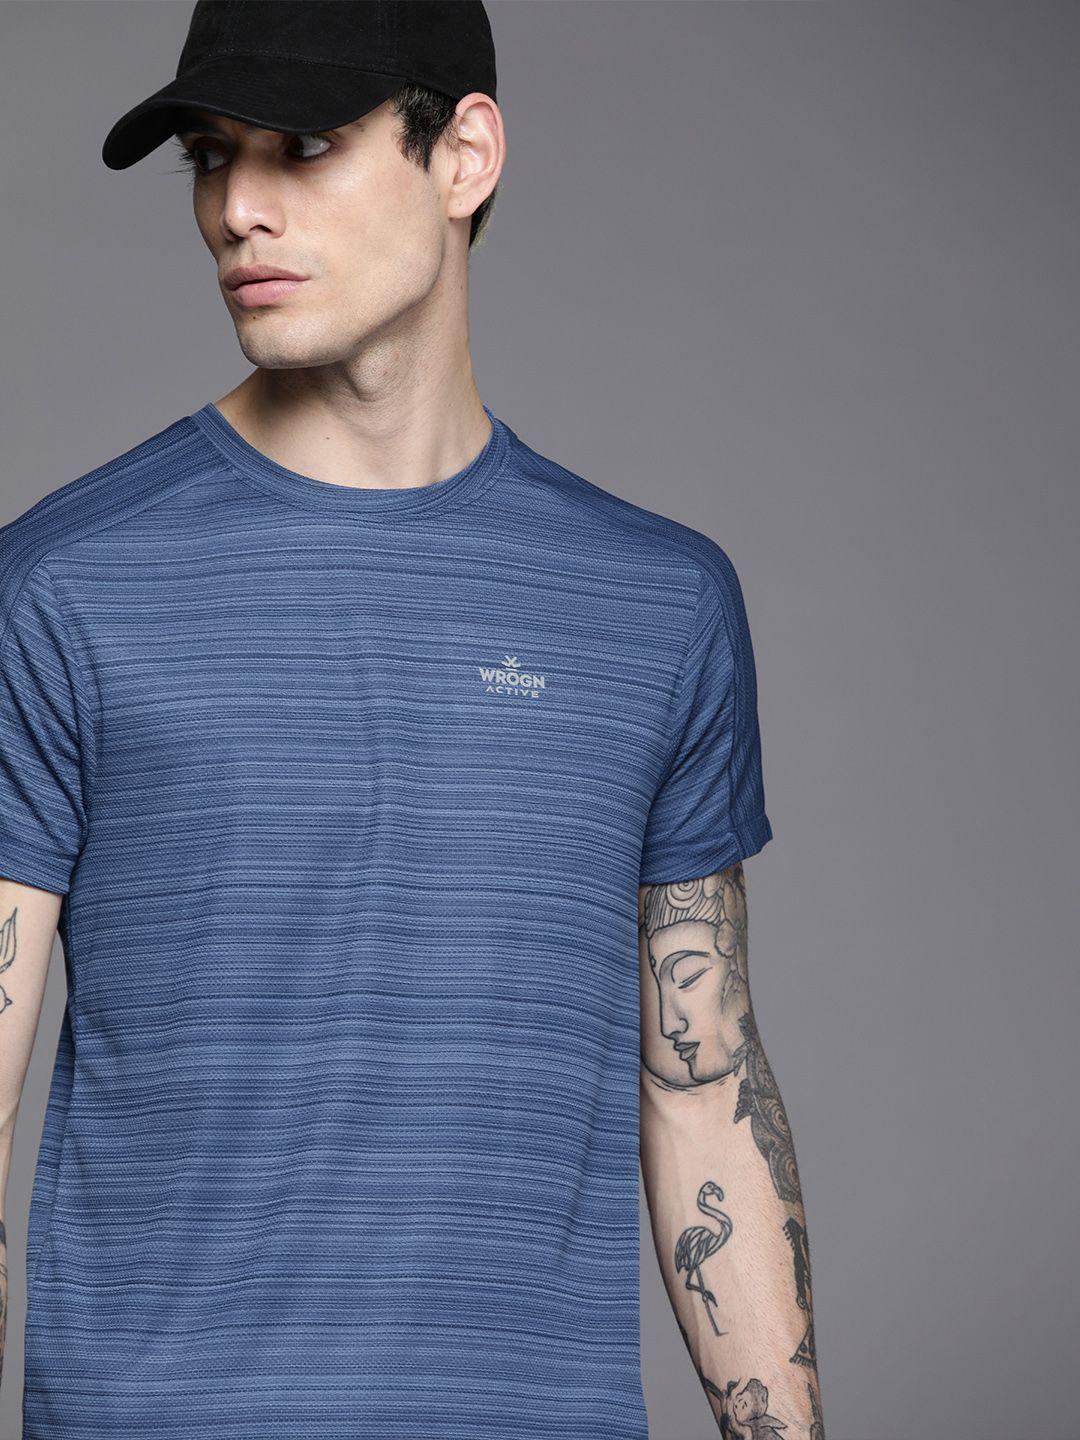 wrogn-active-men-blue-striped-casual-t-shirt